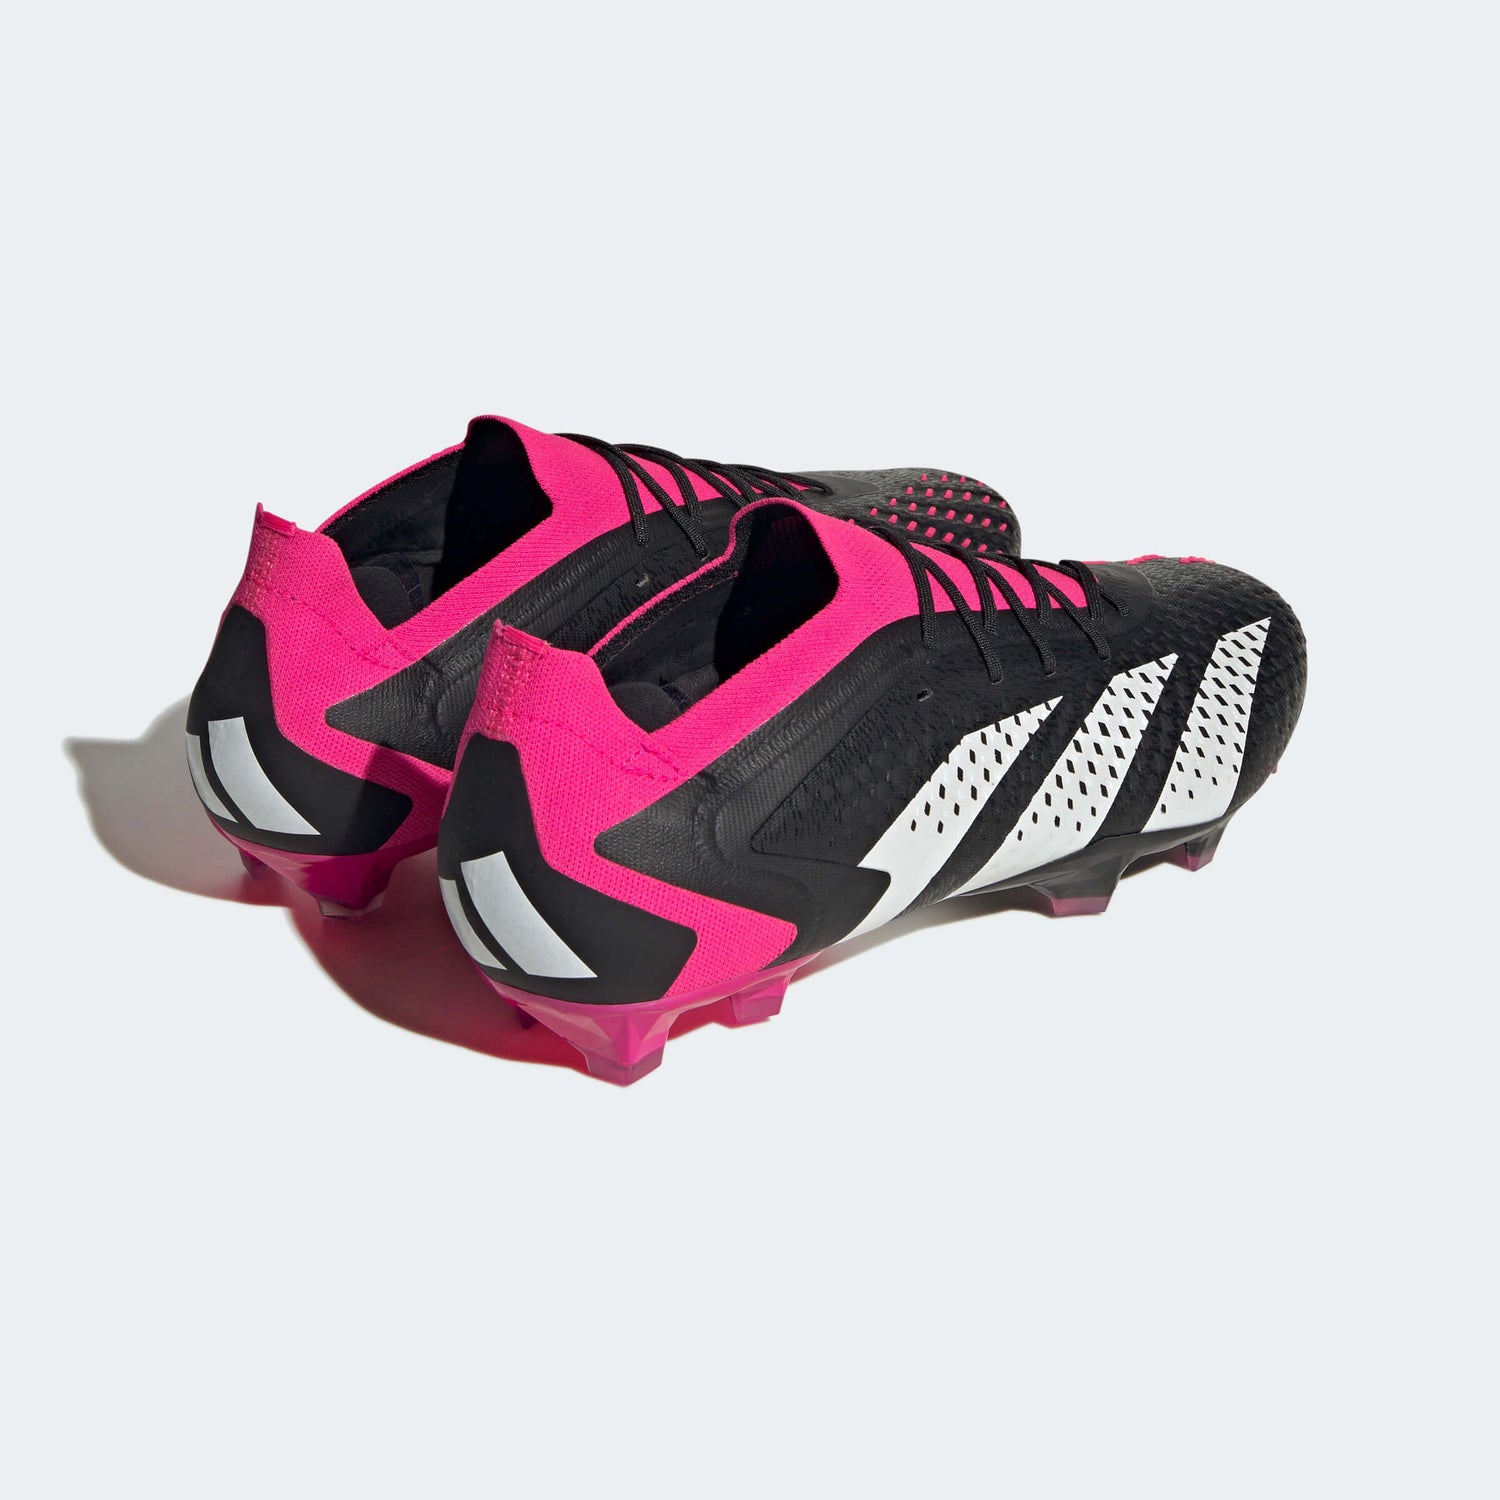 Adidas Predator Accuracy.1 L FG - Own Your Football (SP23) (Pair - Back Lateral)